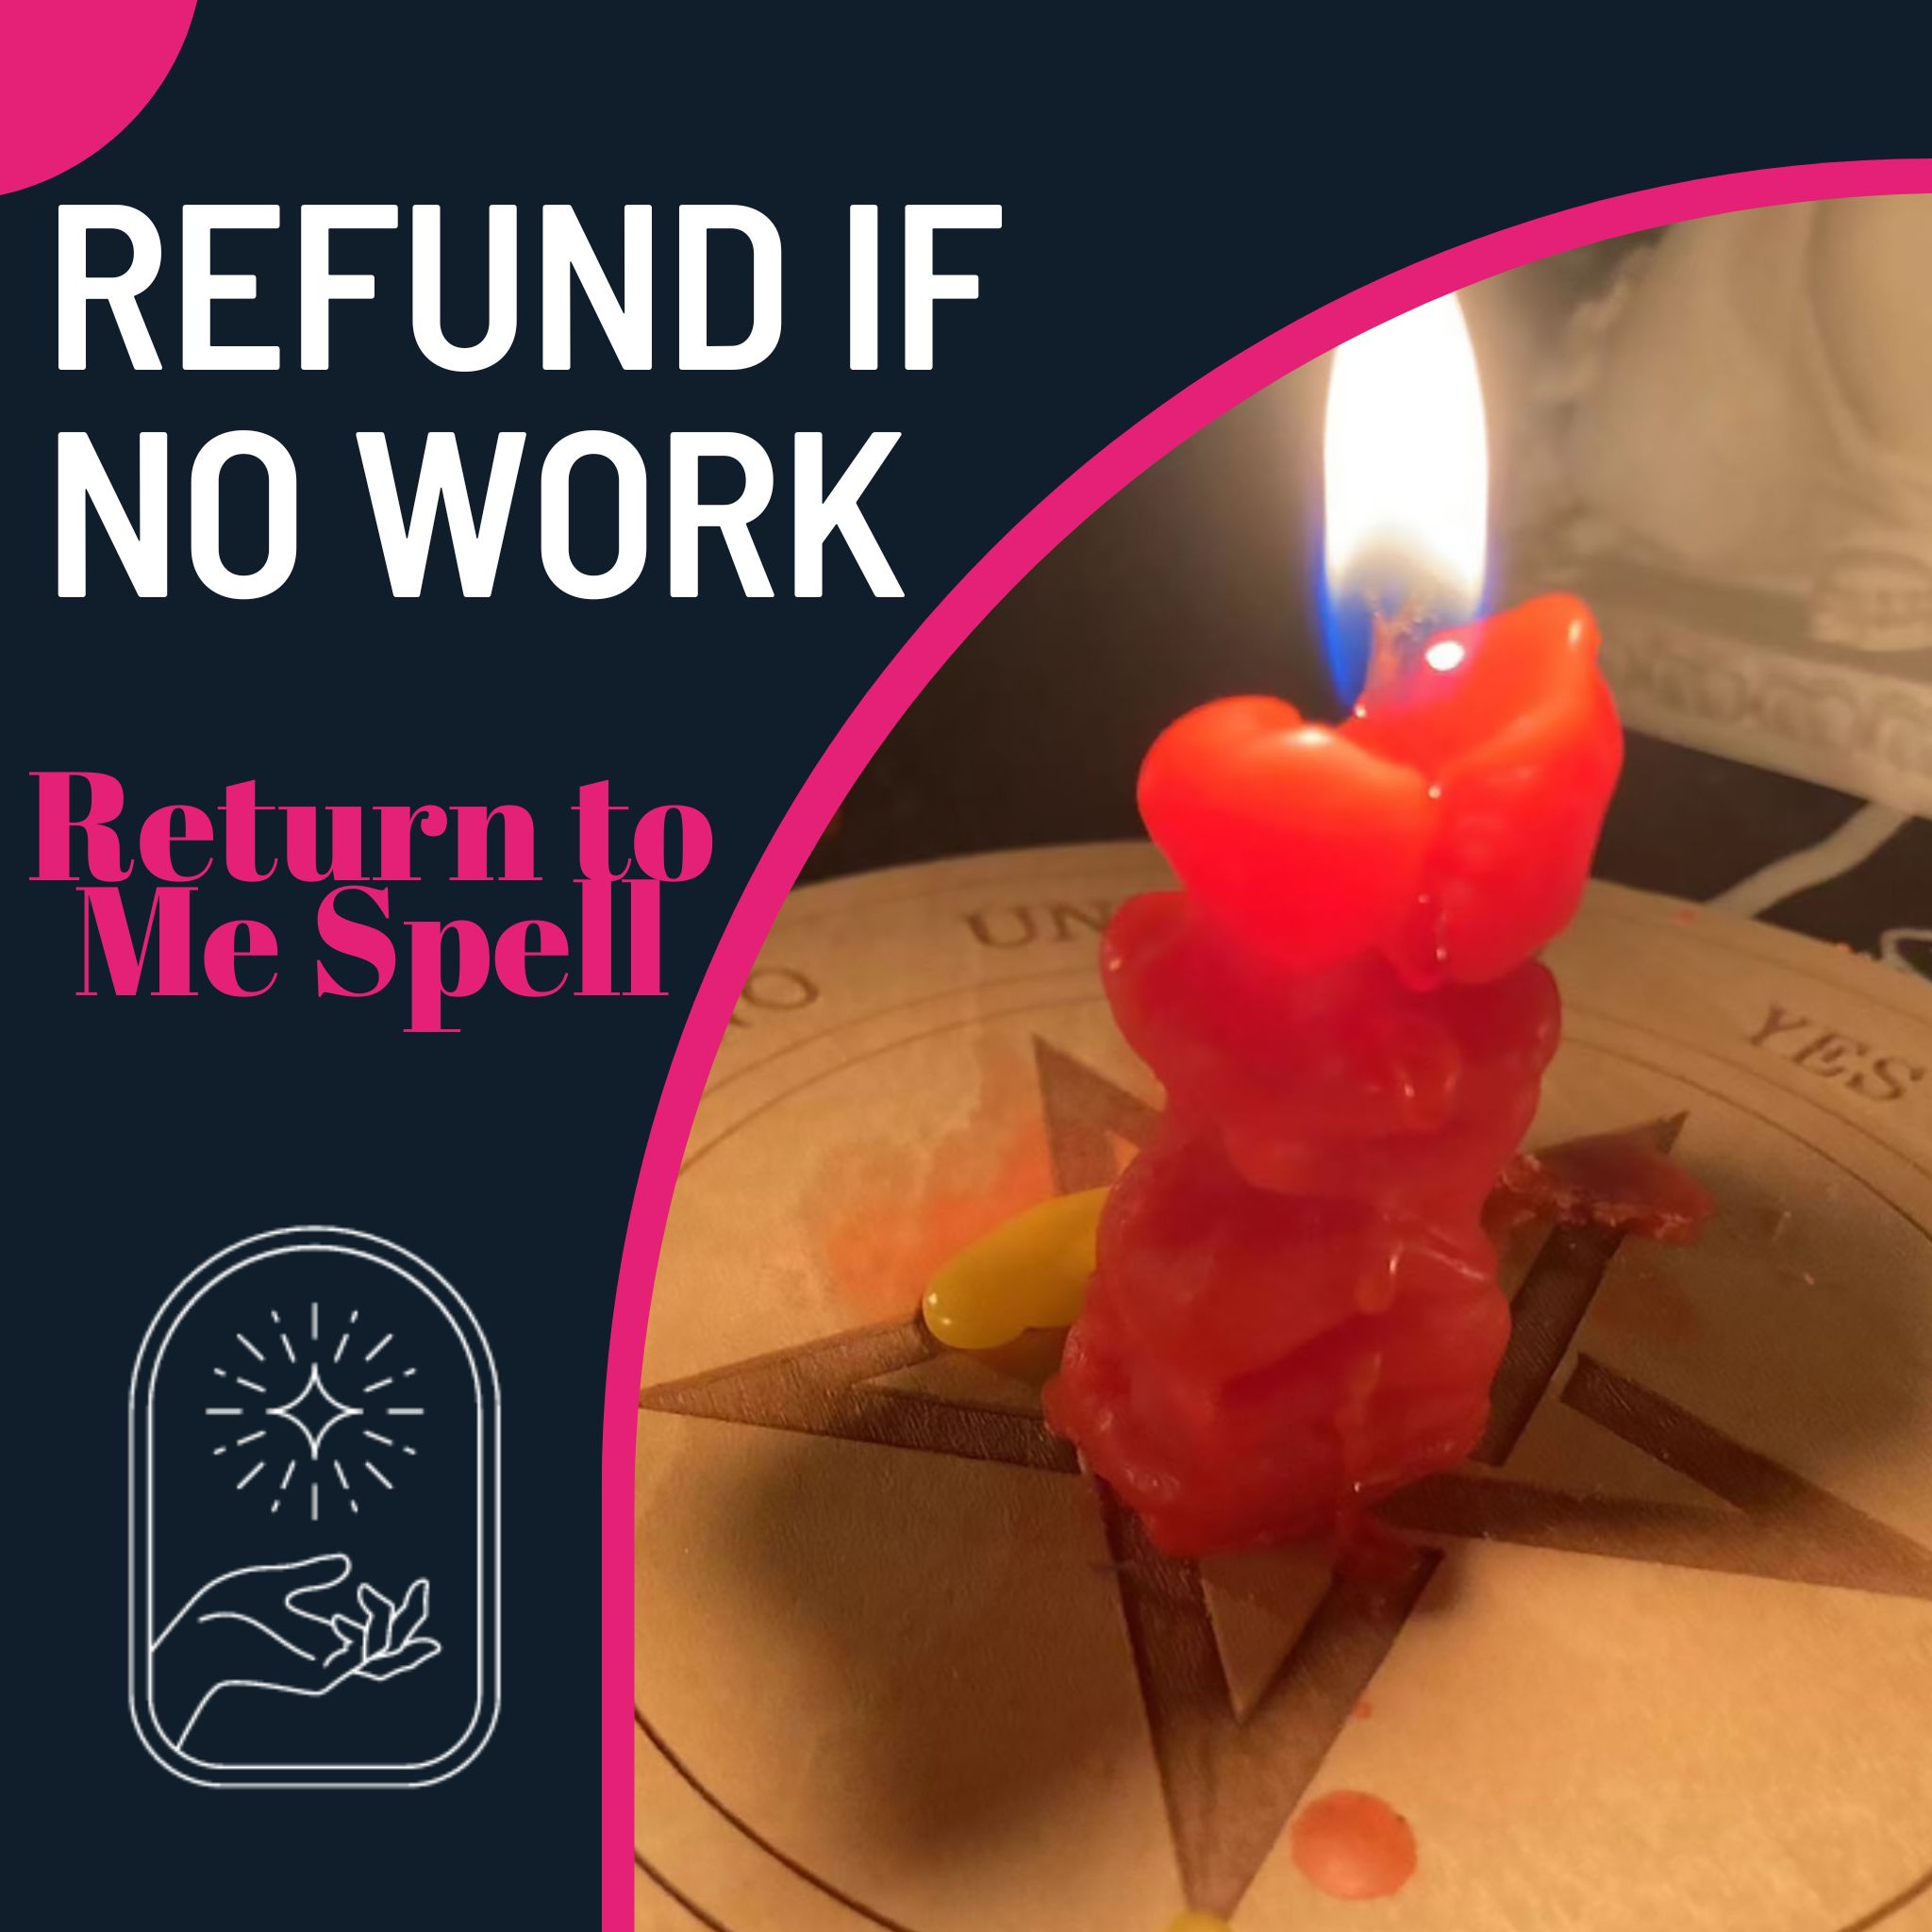 Return to Me Spell【Refund if No Work】